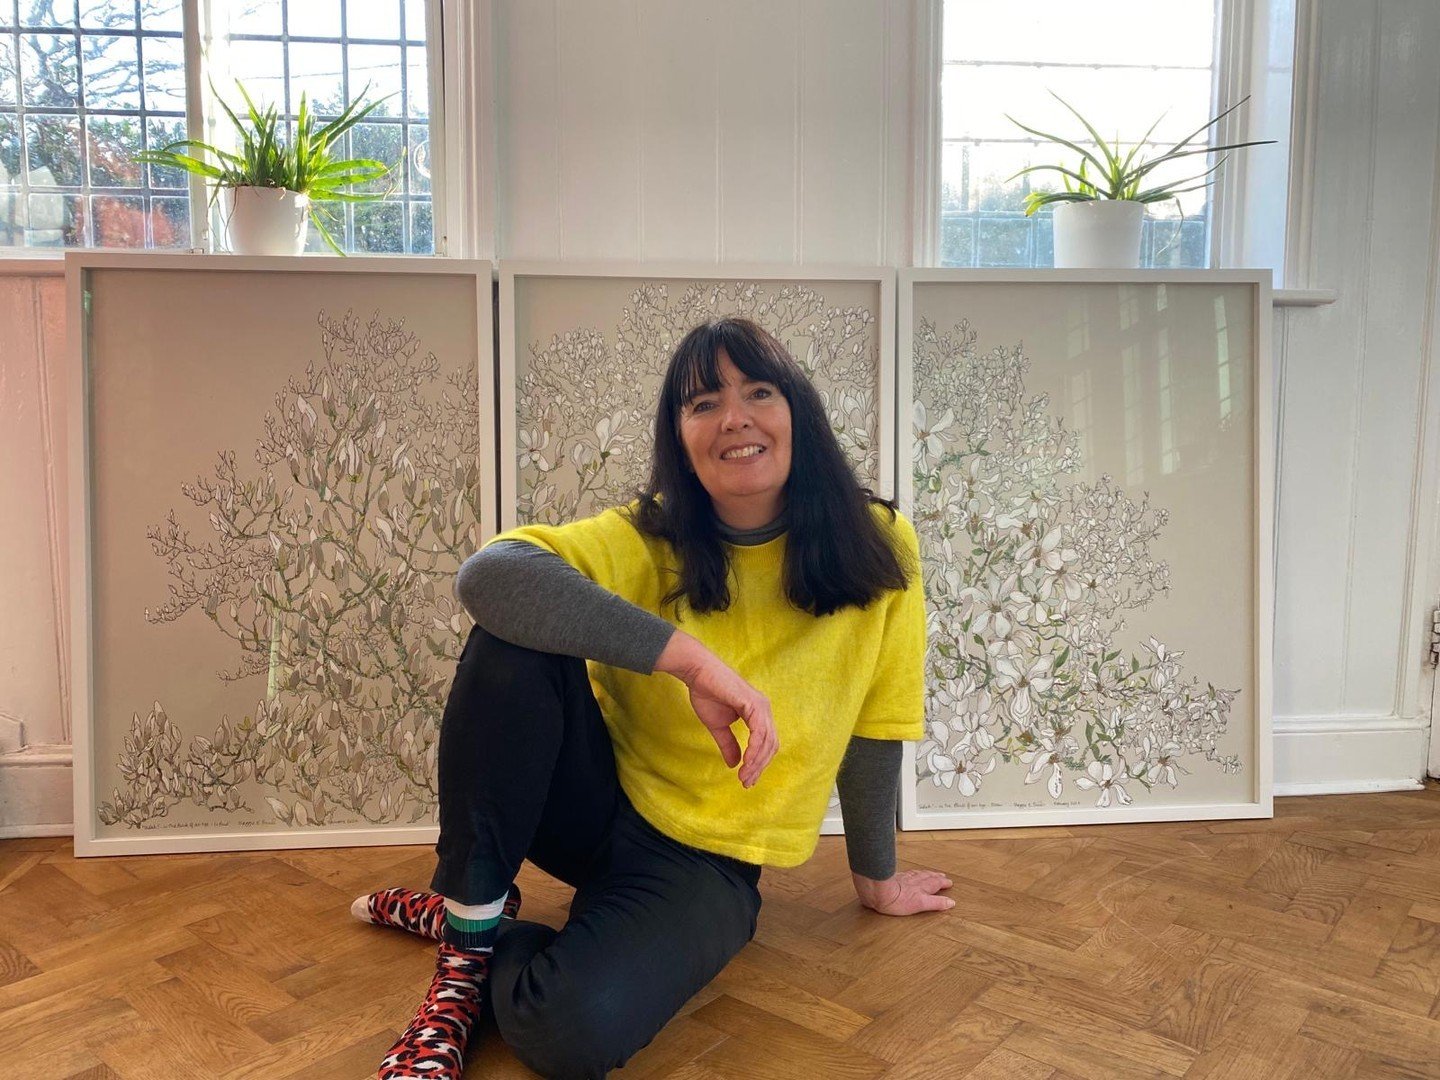 Maggie Smith of @yellowminnowsketch is a botanical artist currently living in East Sussex.

Maggie loves to draw outside in her Sussex garden and in the surrounding countryside, and is equally fascinated in the over looked weeds and wild flowers of t